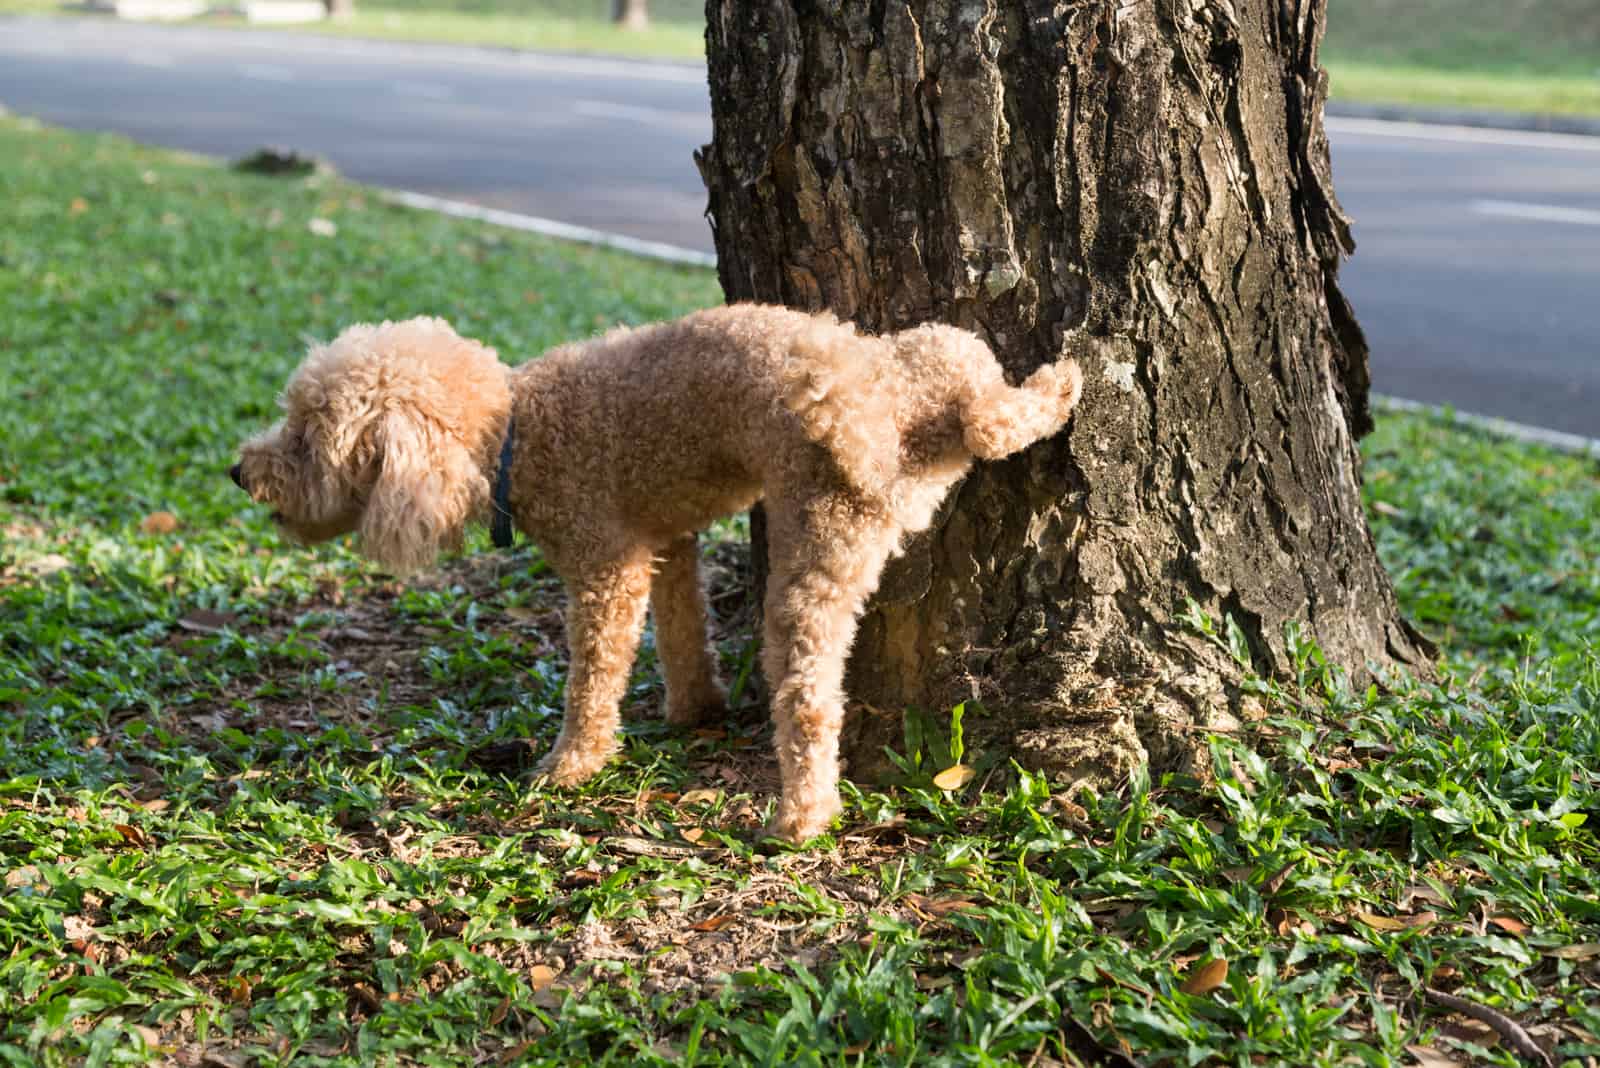 the dog performs urination next to a tree